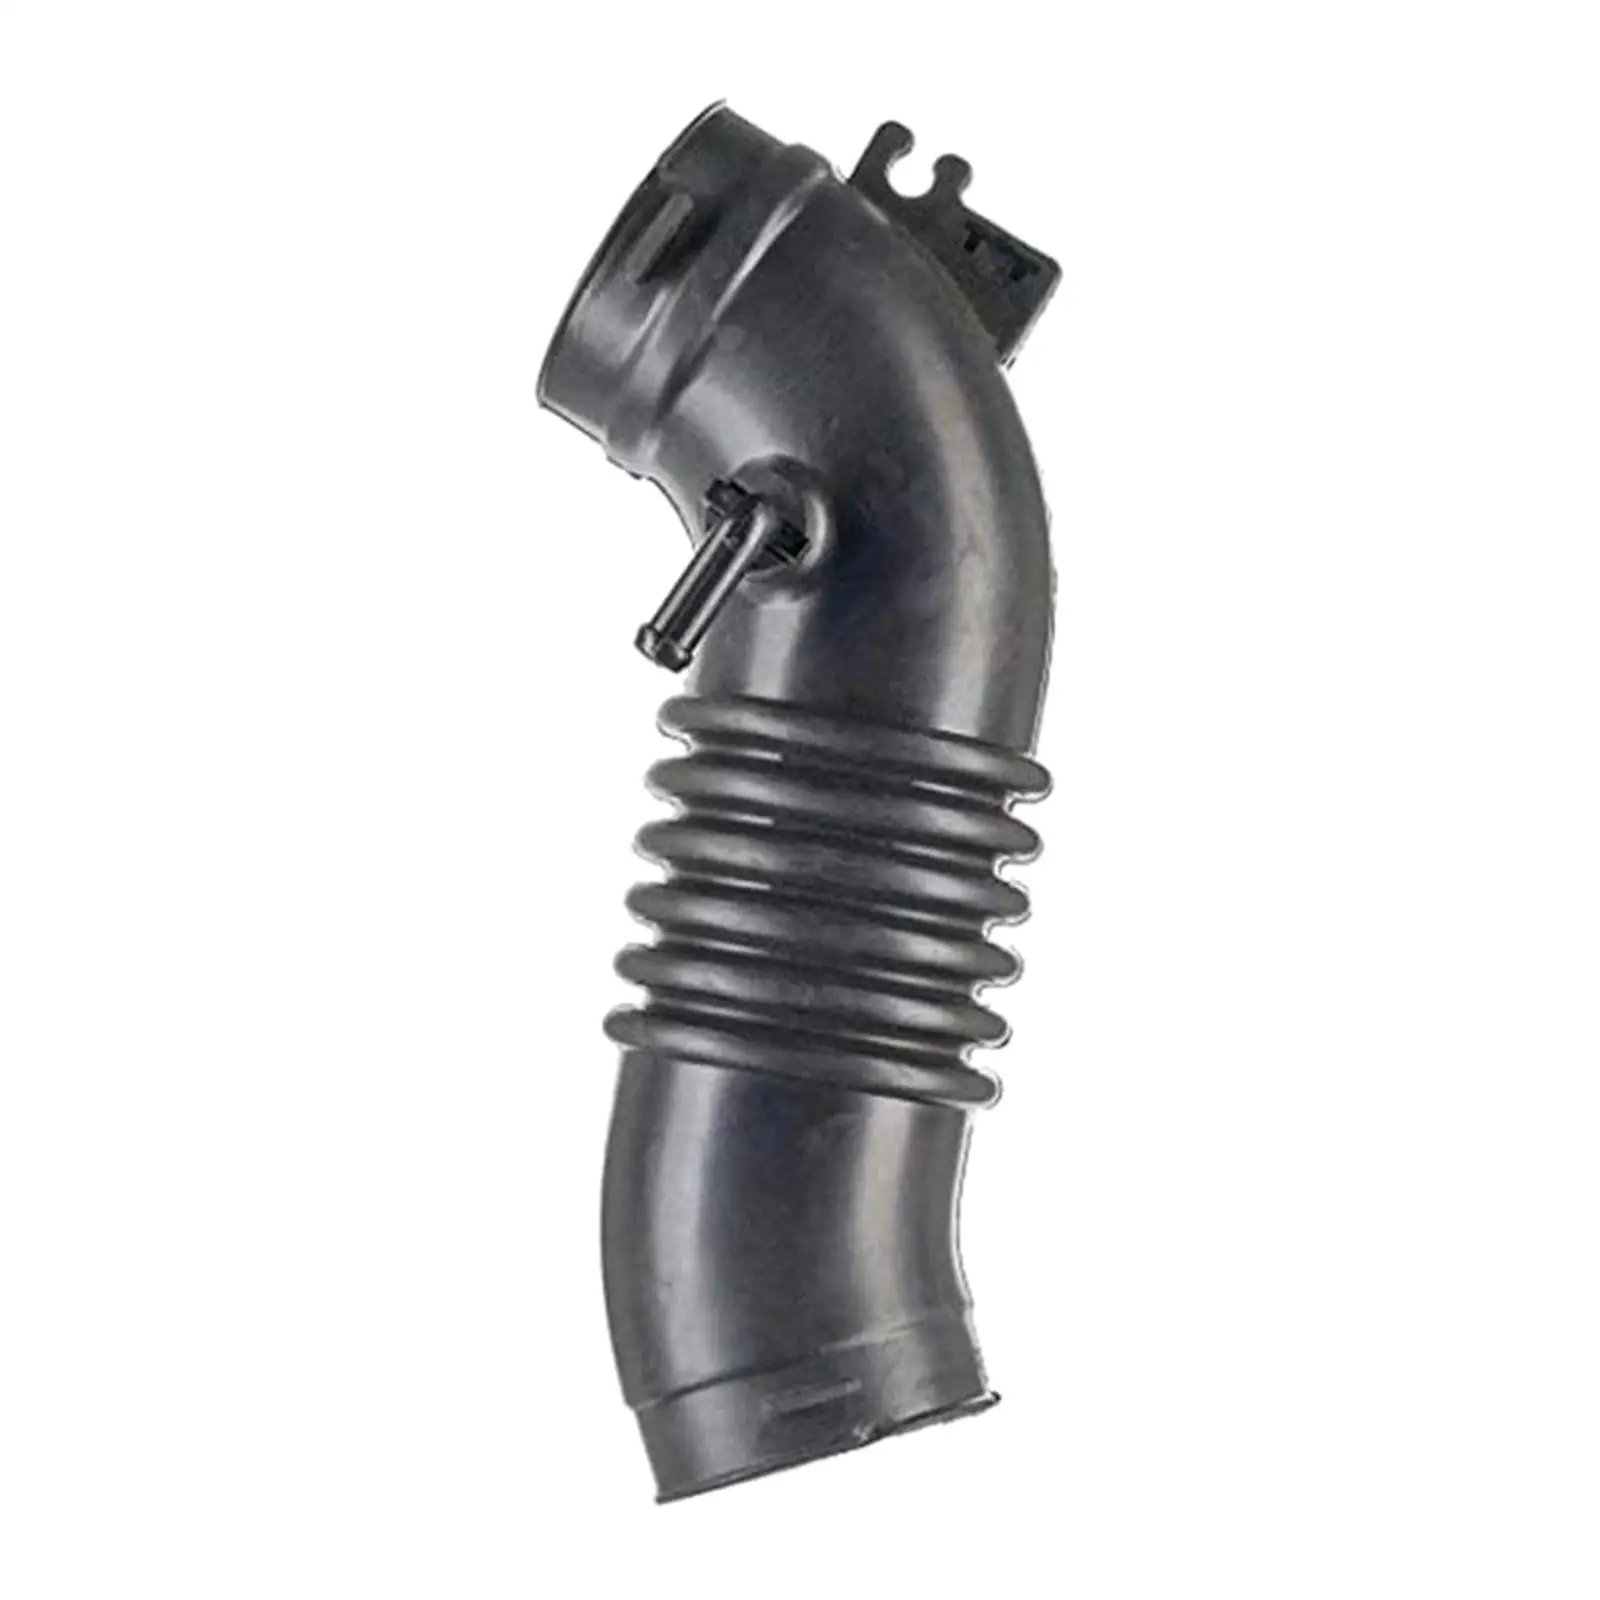 Air Intake Boot Hose Tube, Convenient Rugged And Durable Air Intake Boot, for